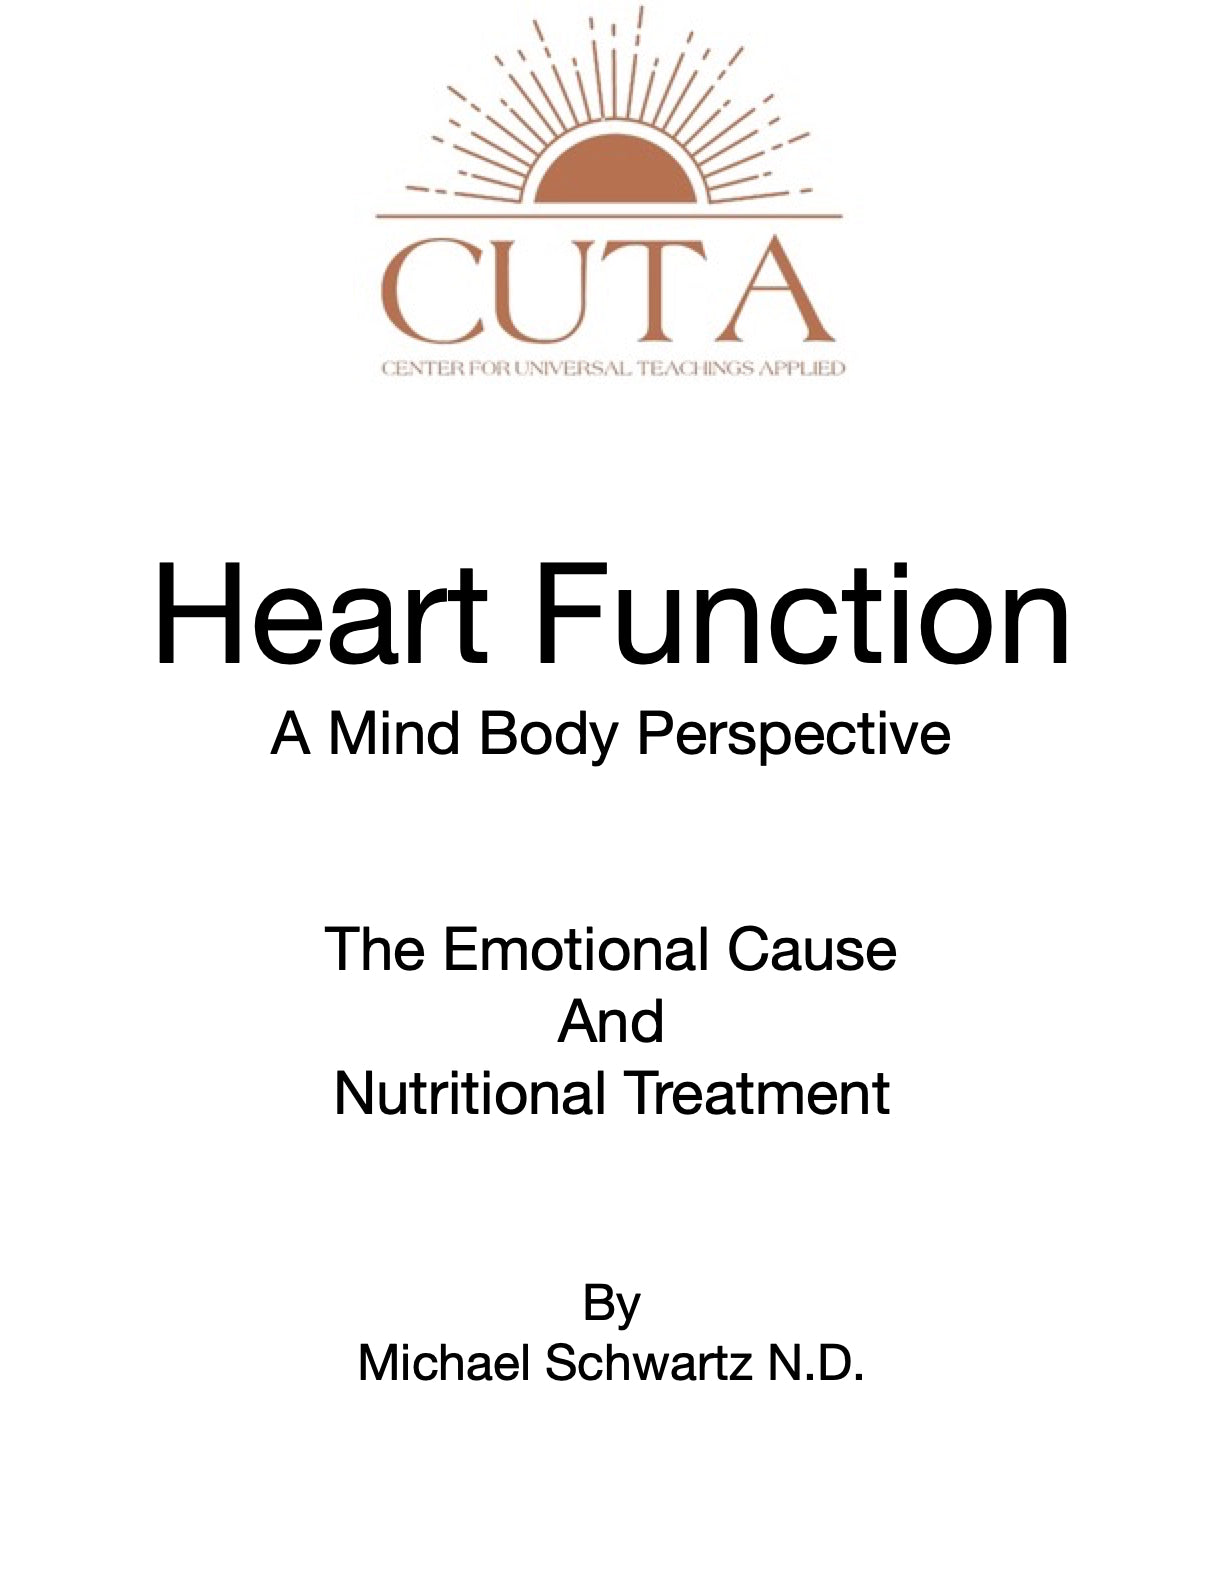 Heart Function Booklet